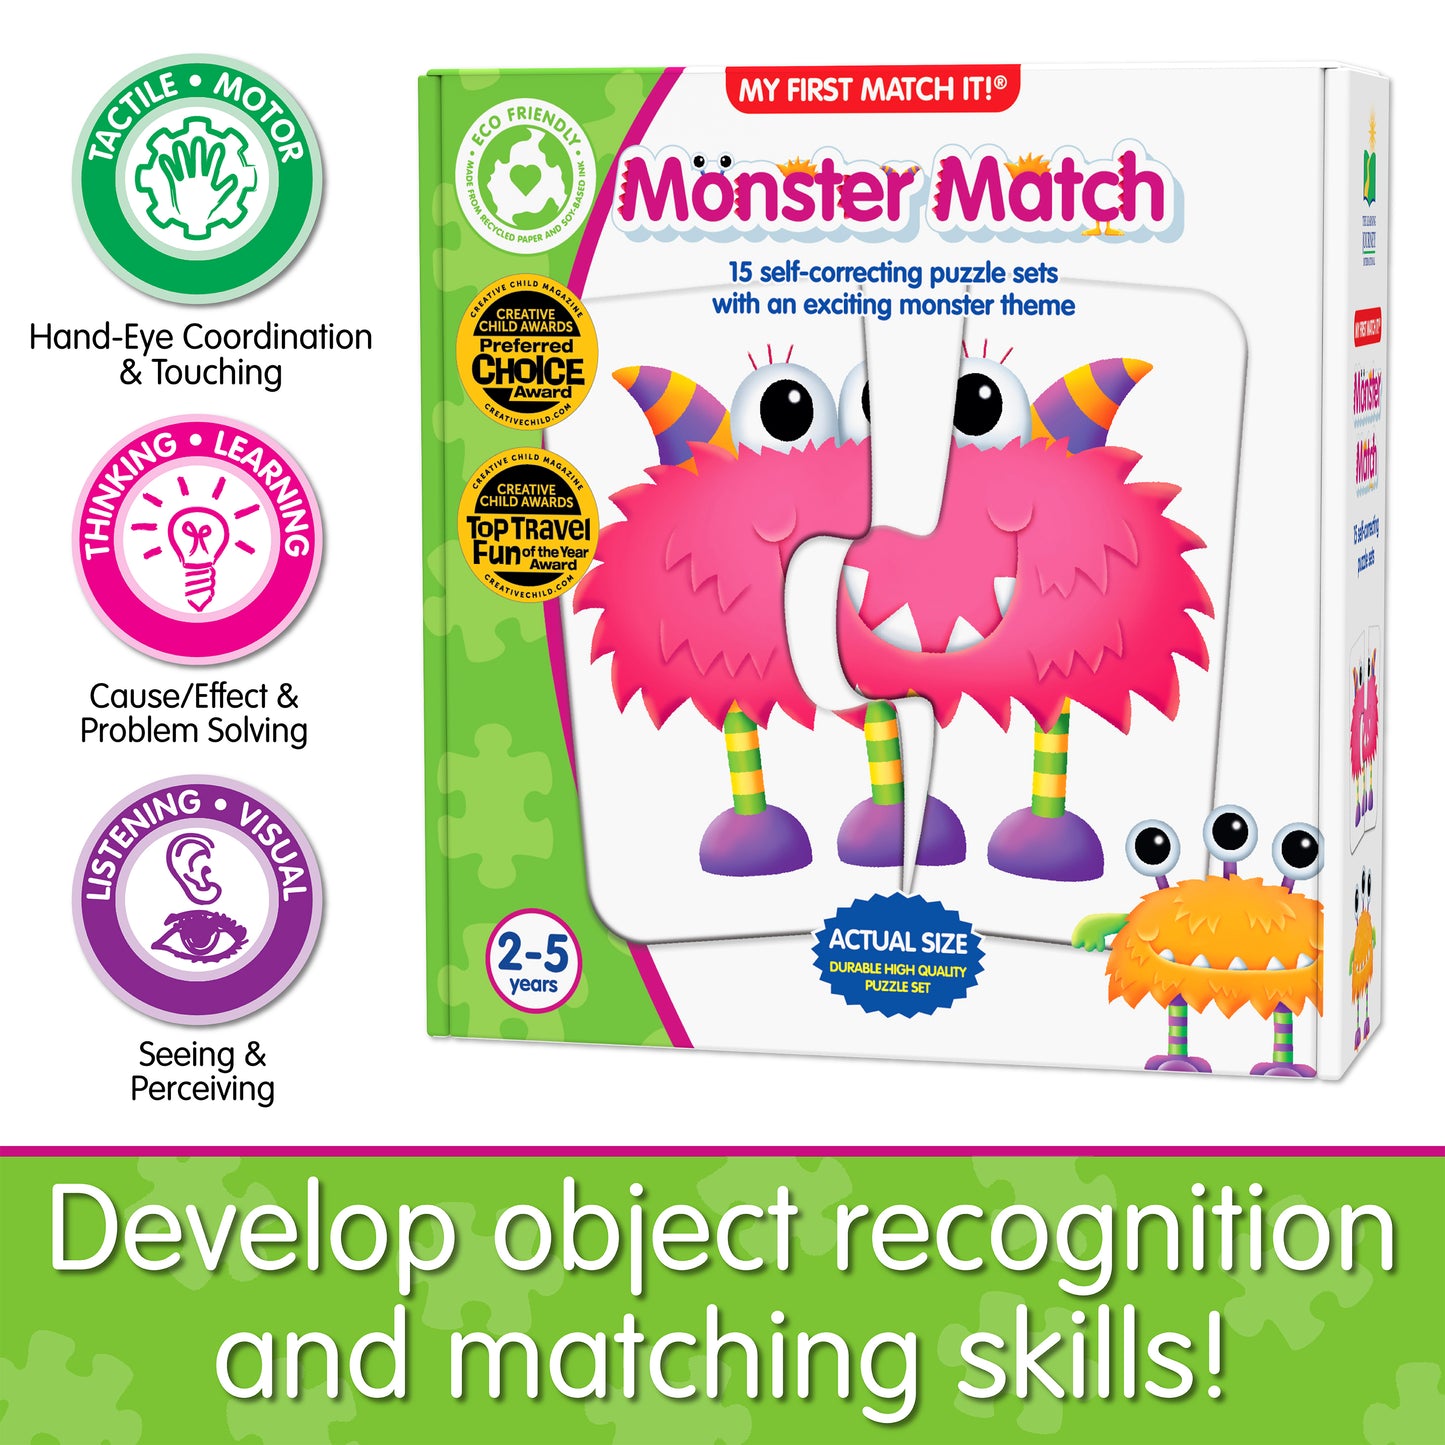 Infographic about My First Match It - Monster Match's educational benefits that says, "Develop object recognition and matching skills!"